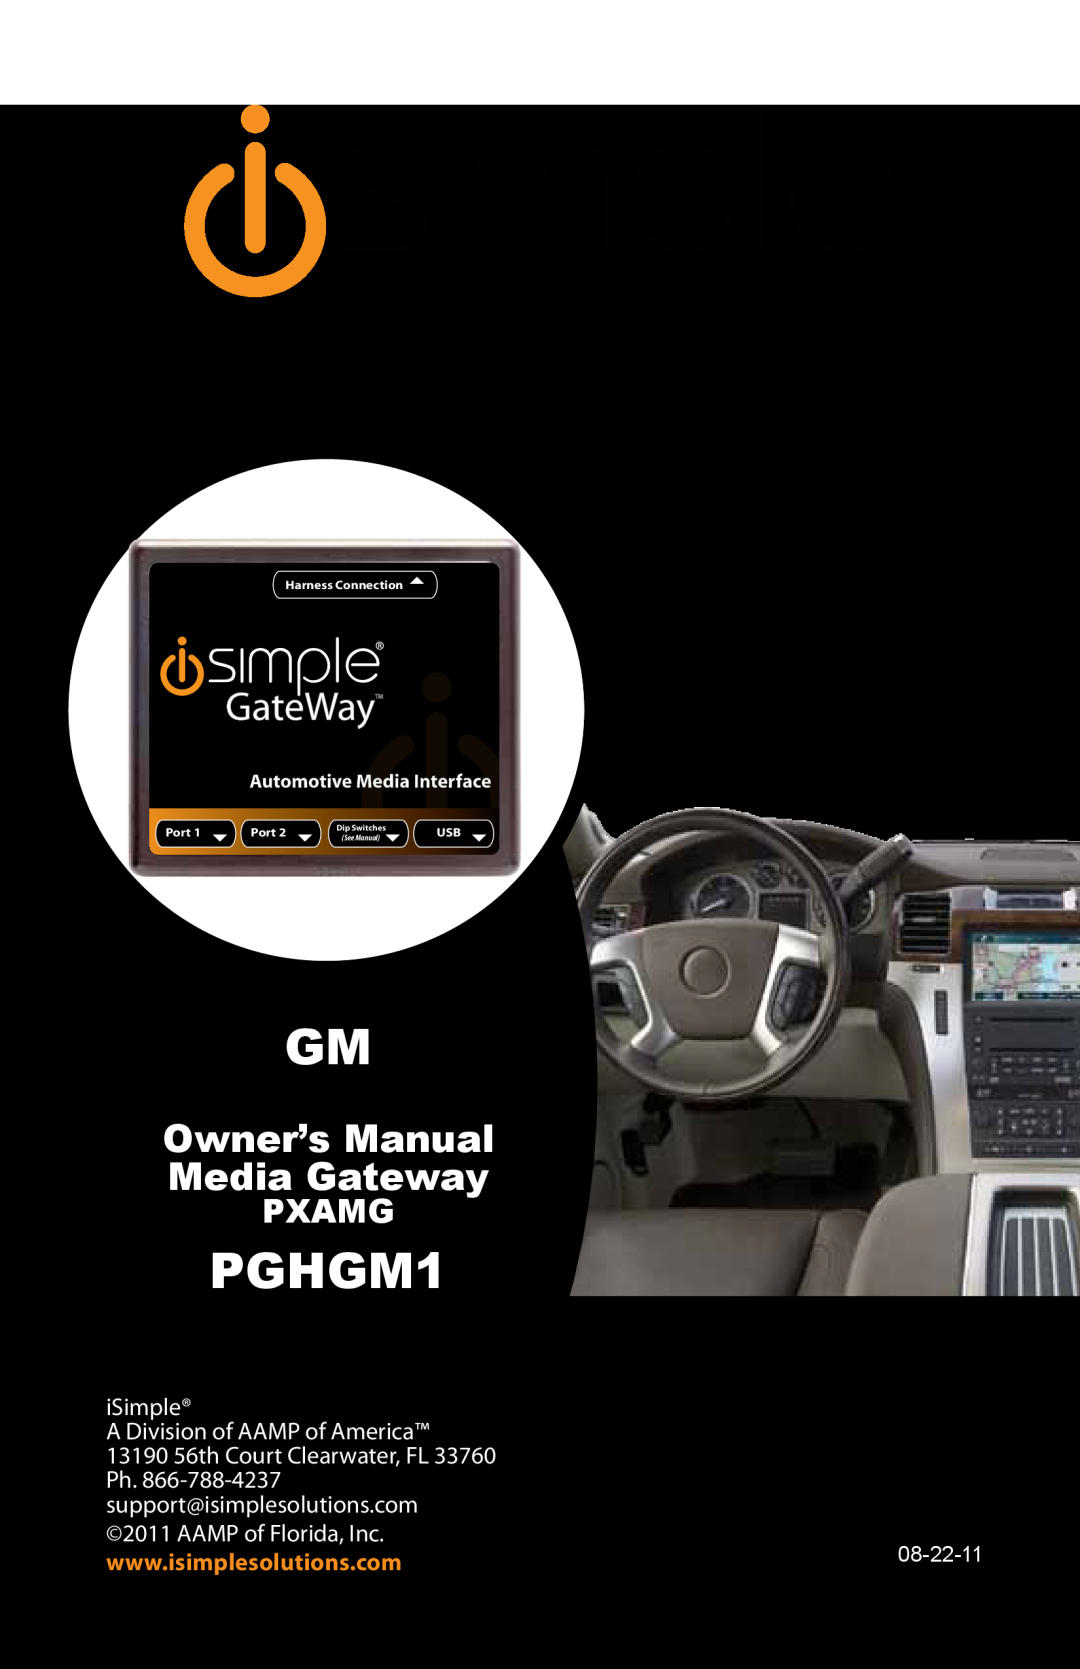 iSimple PXAMG owner manual iPod, Expand Your Factory Radio, PGHGM5, Pxamg, iSimple A Division of AAMP of America, Inst007 